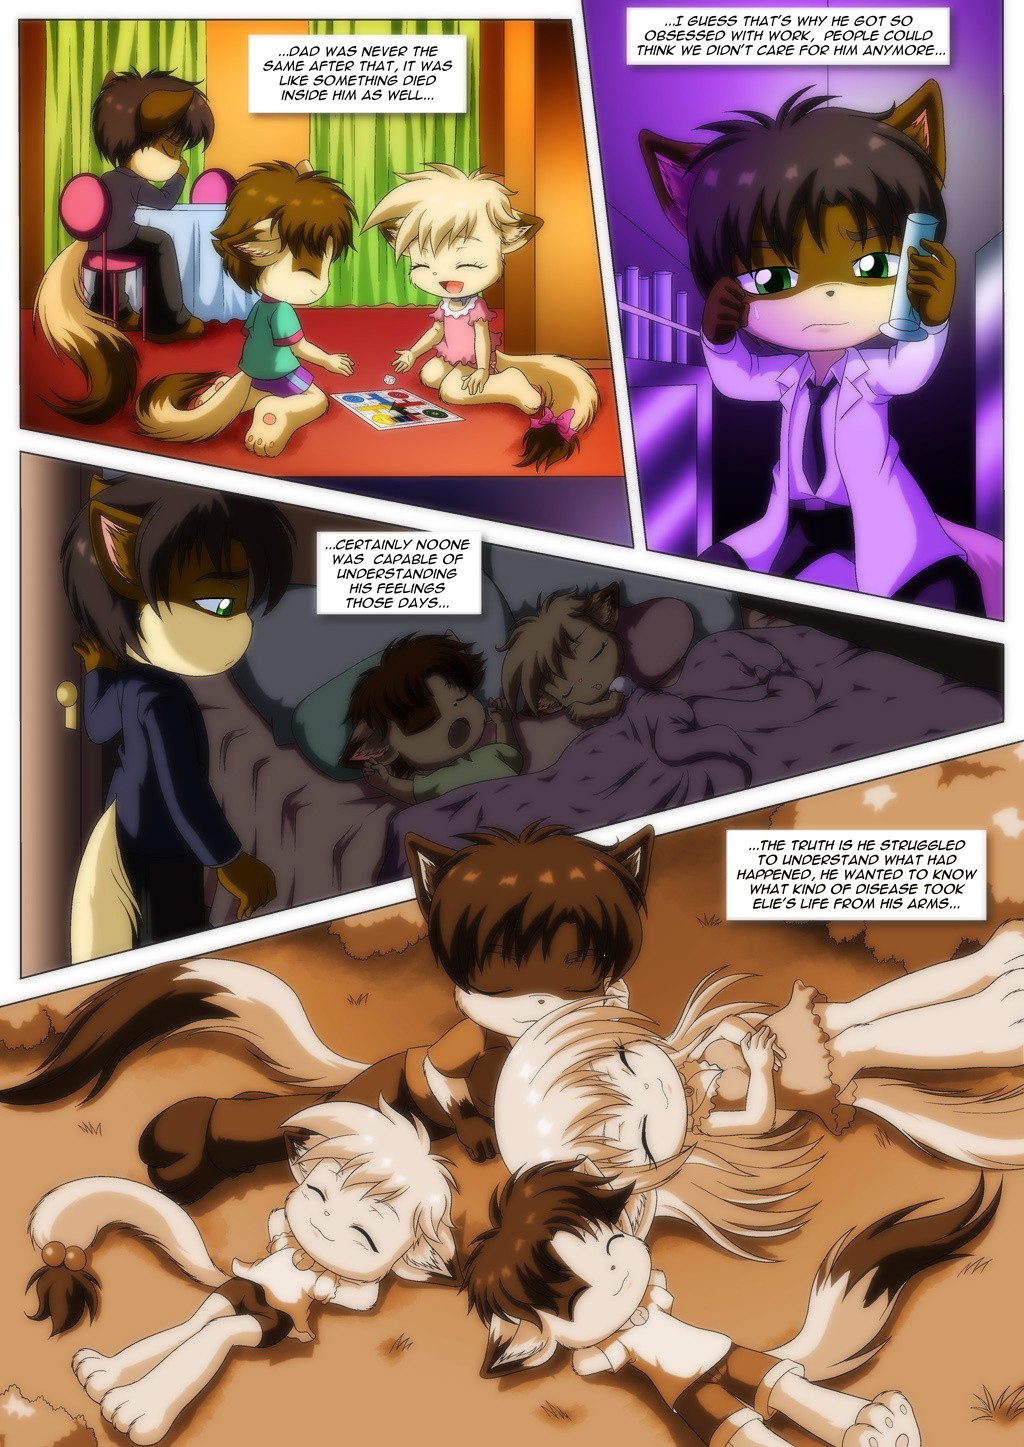 Little Tails 6: Missing The Light of The Day porn comic picture 21